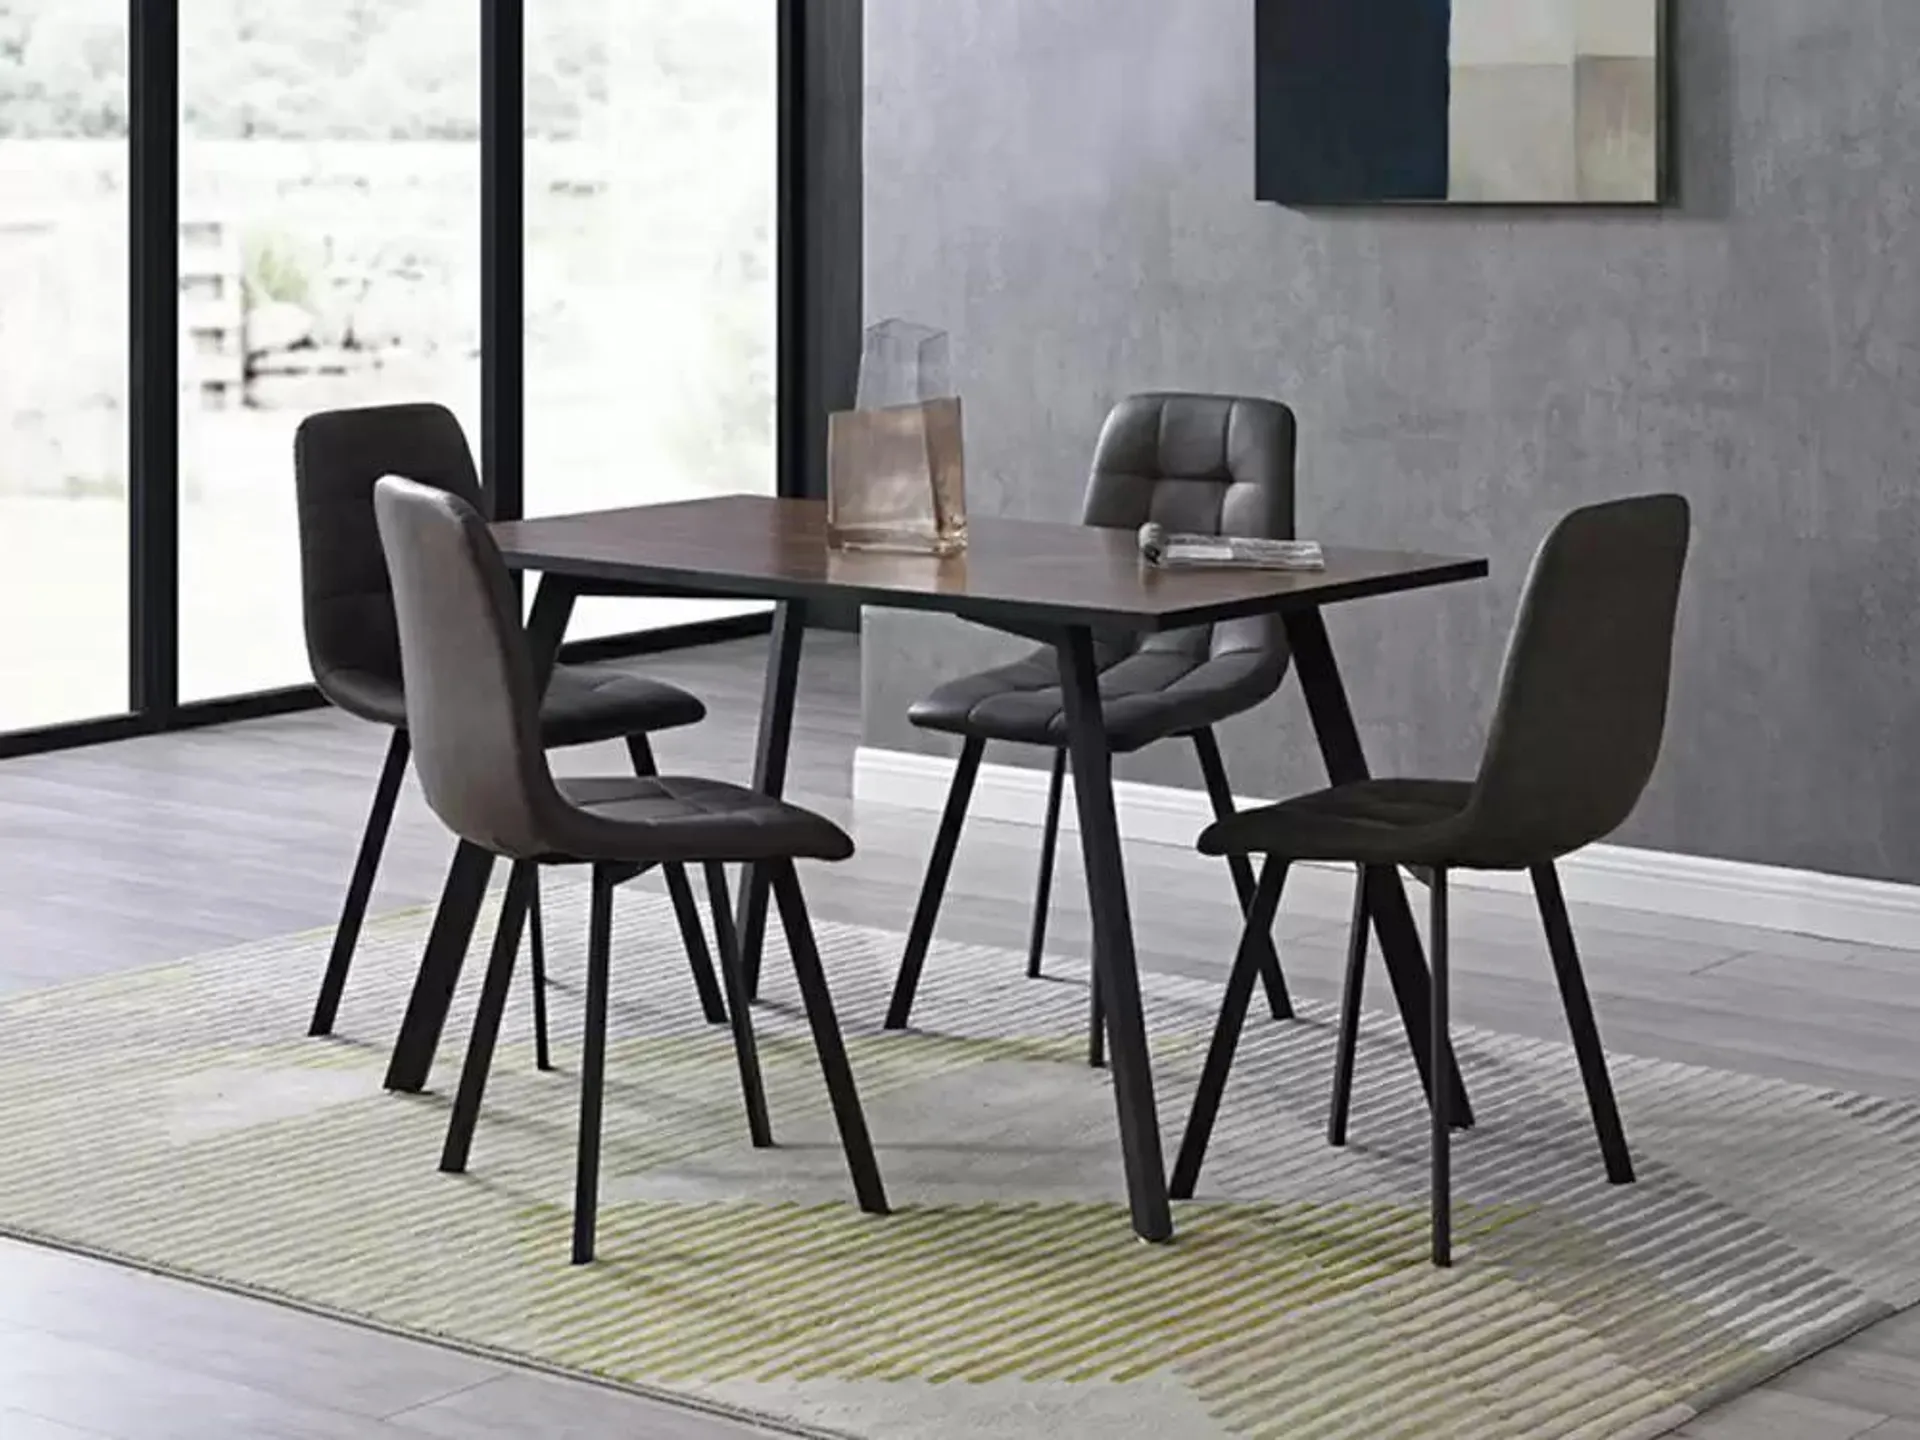 Table rectangulaire + 4 chaises